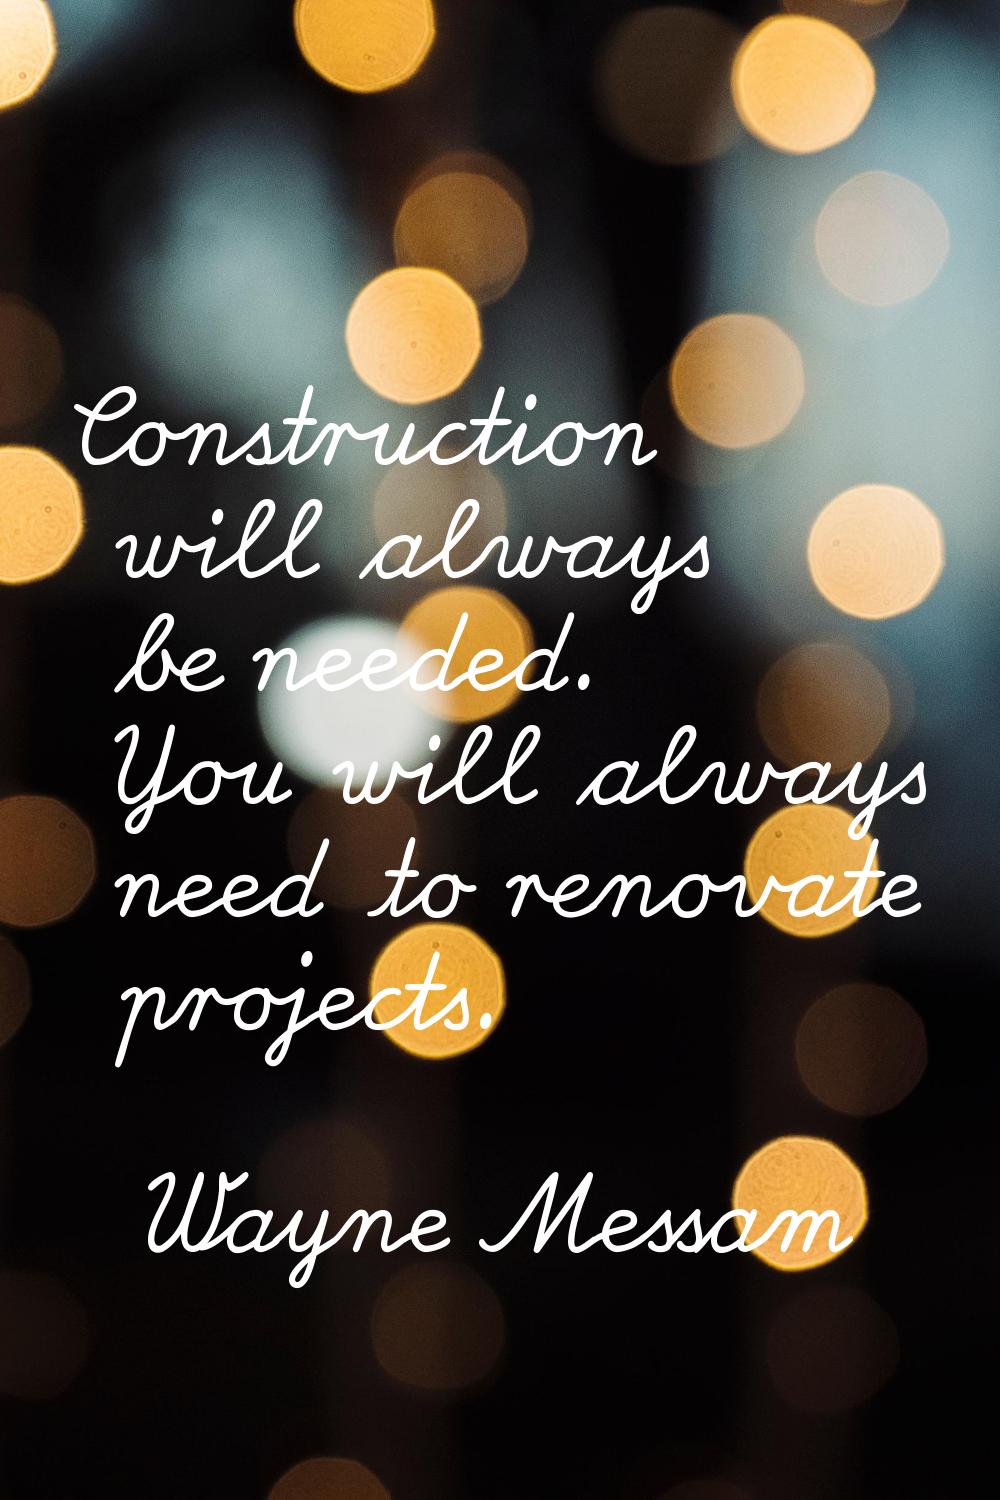 Construction will always be needed. You will always need to renovate projects.